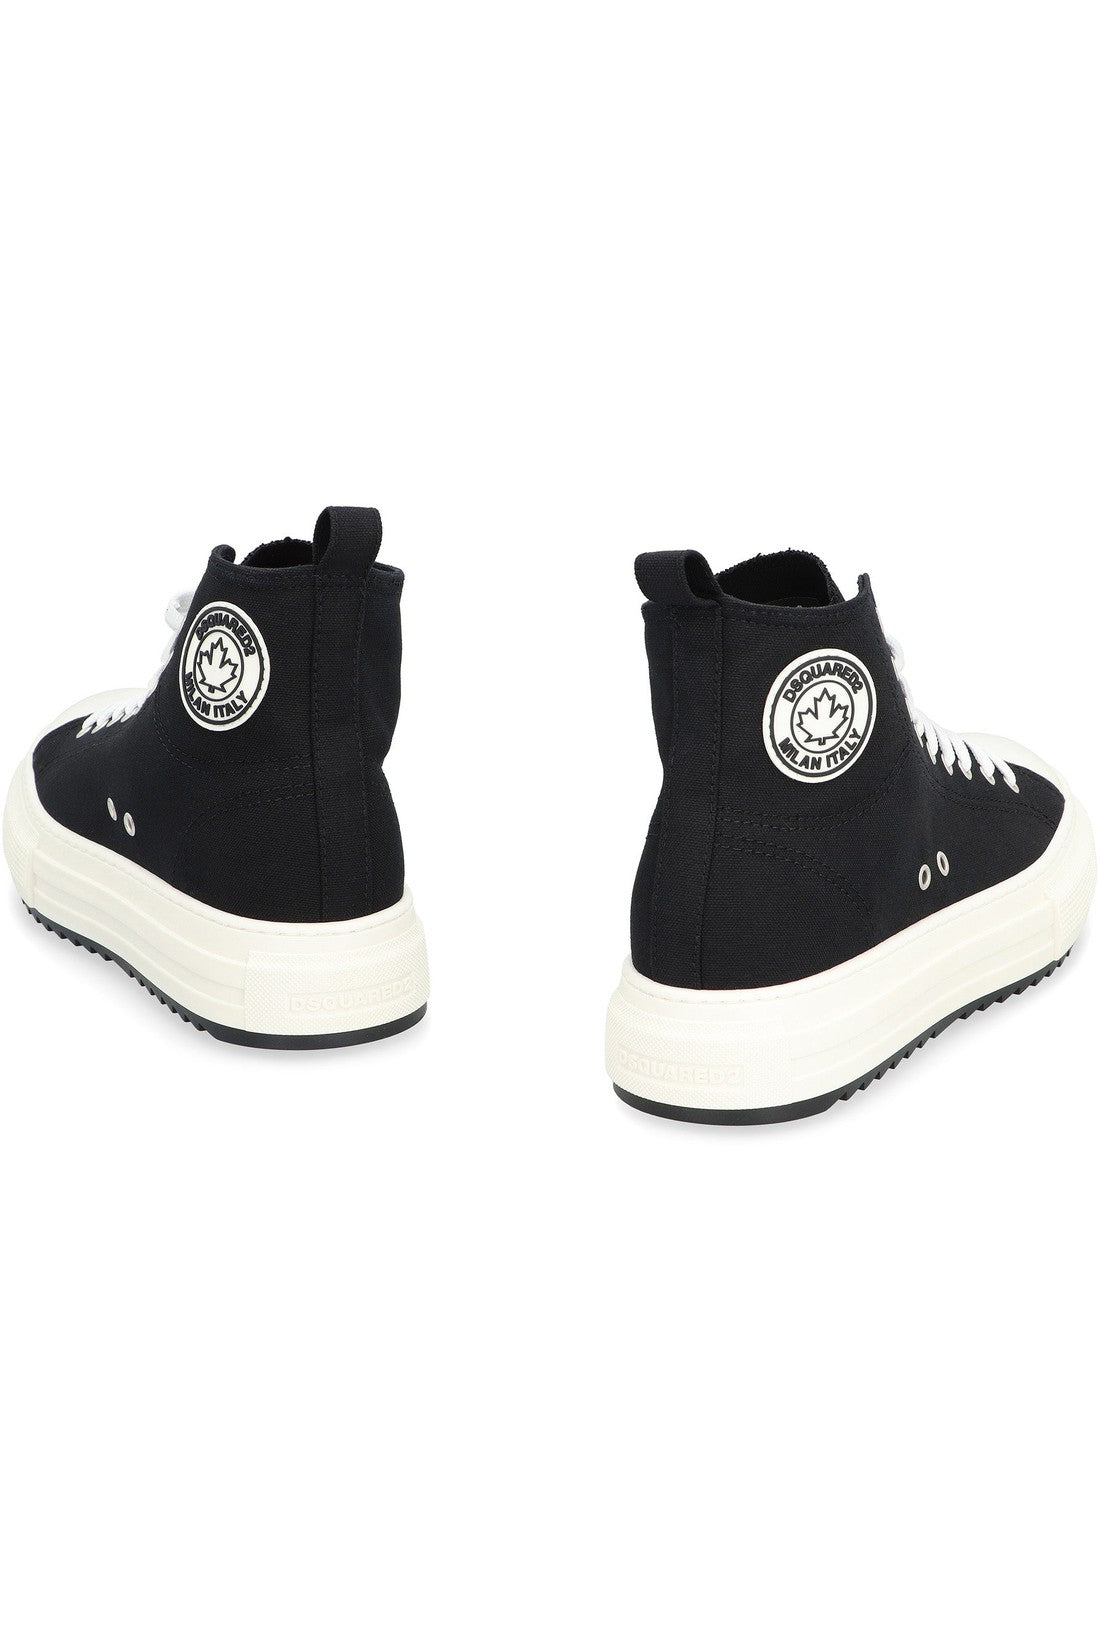 Dsquared2-OUTLET-SALE-Canvas high-top sneakers-ARCHIVIST